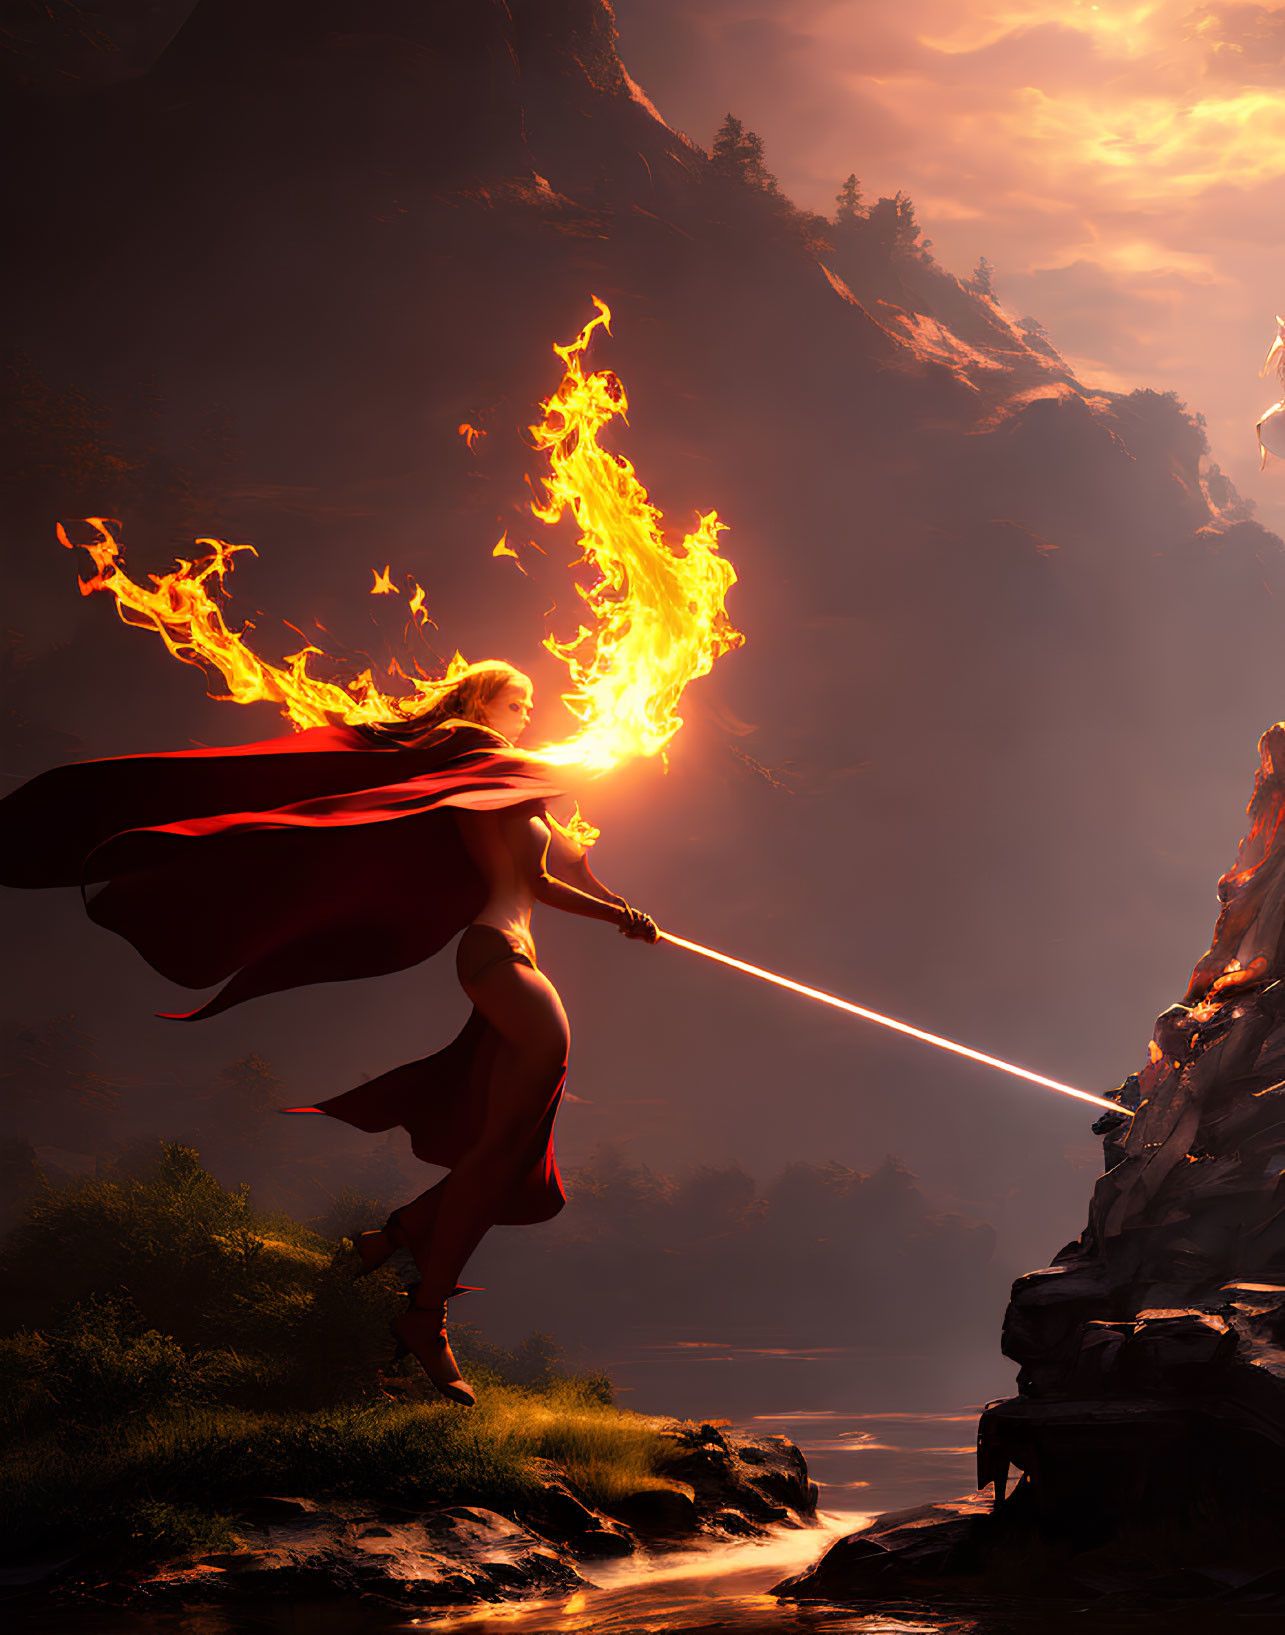 Fiery-haired figure with radiant spear on rocky outcrop at sunset